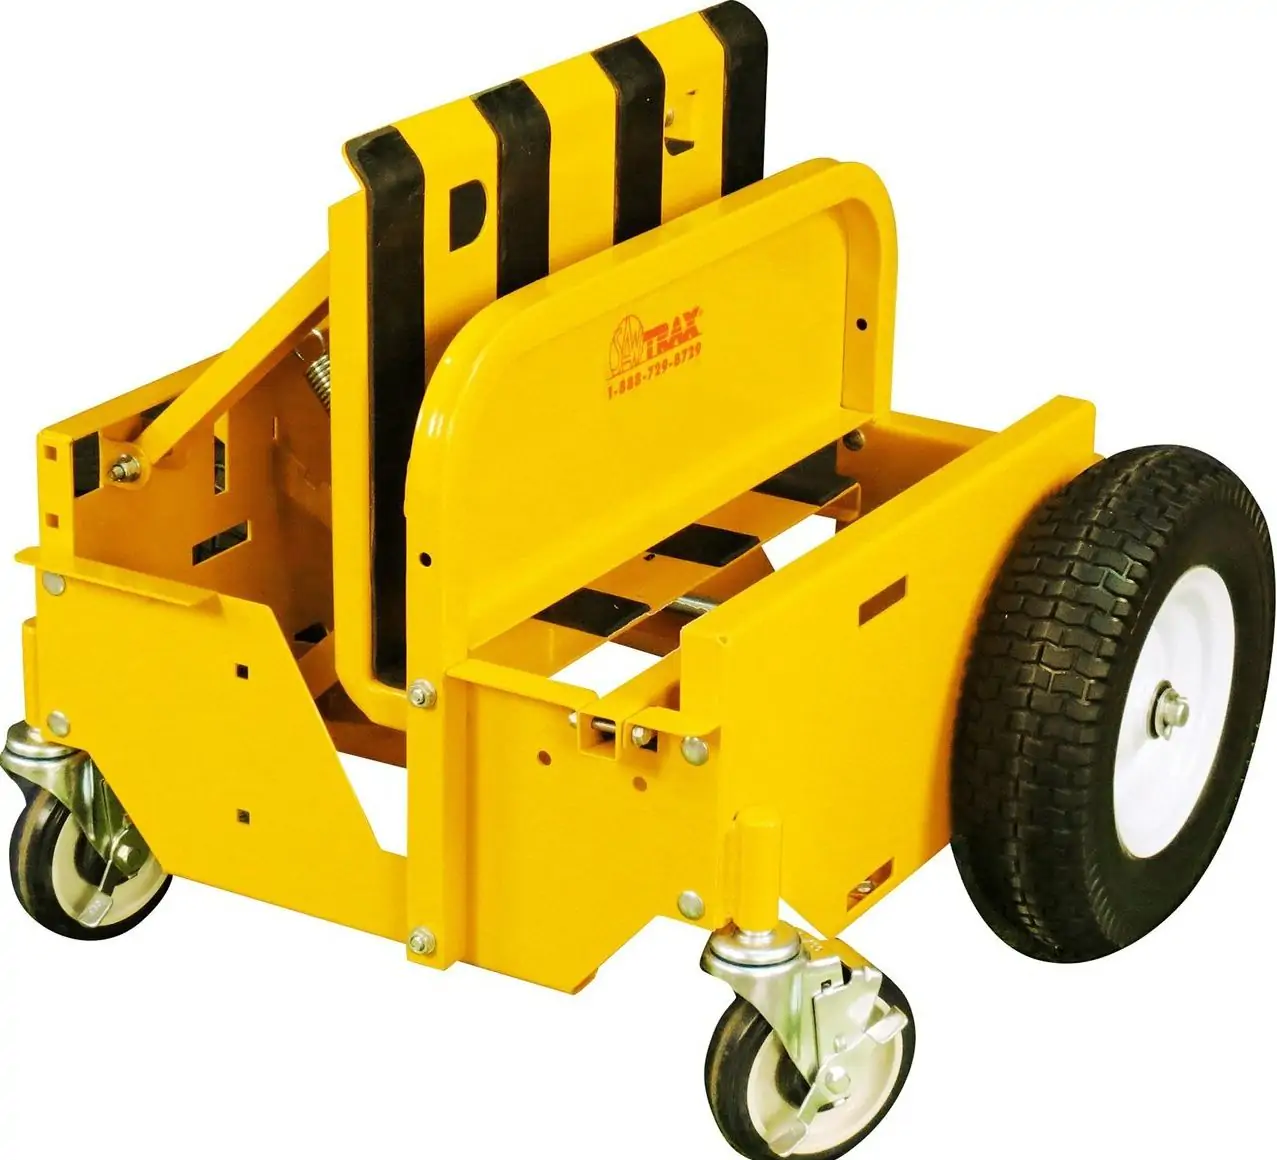 A yellow and black SawTrax Panel Cart Material Mover with wheels
